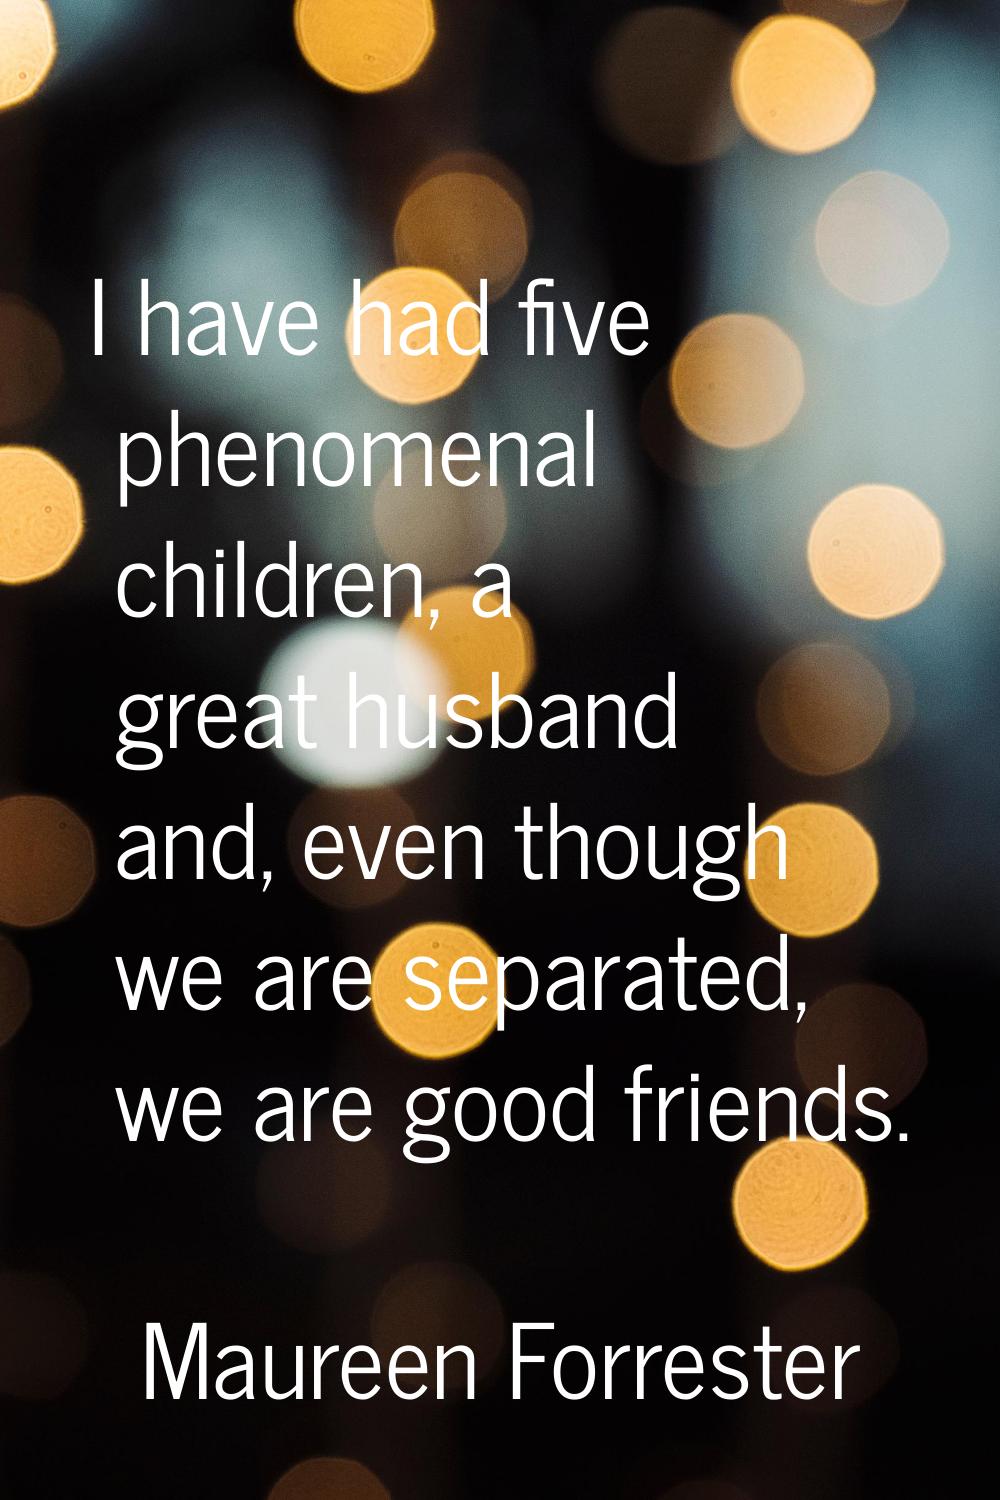 I have had five phenomenal children, a great husband and, even though we are separated, we are good